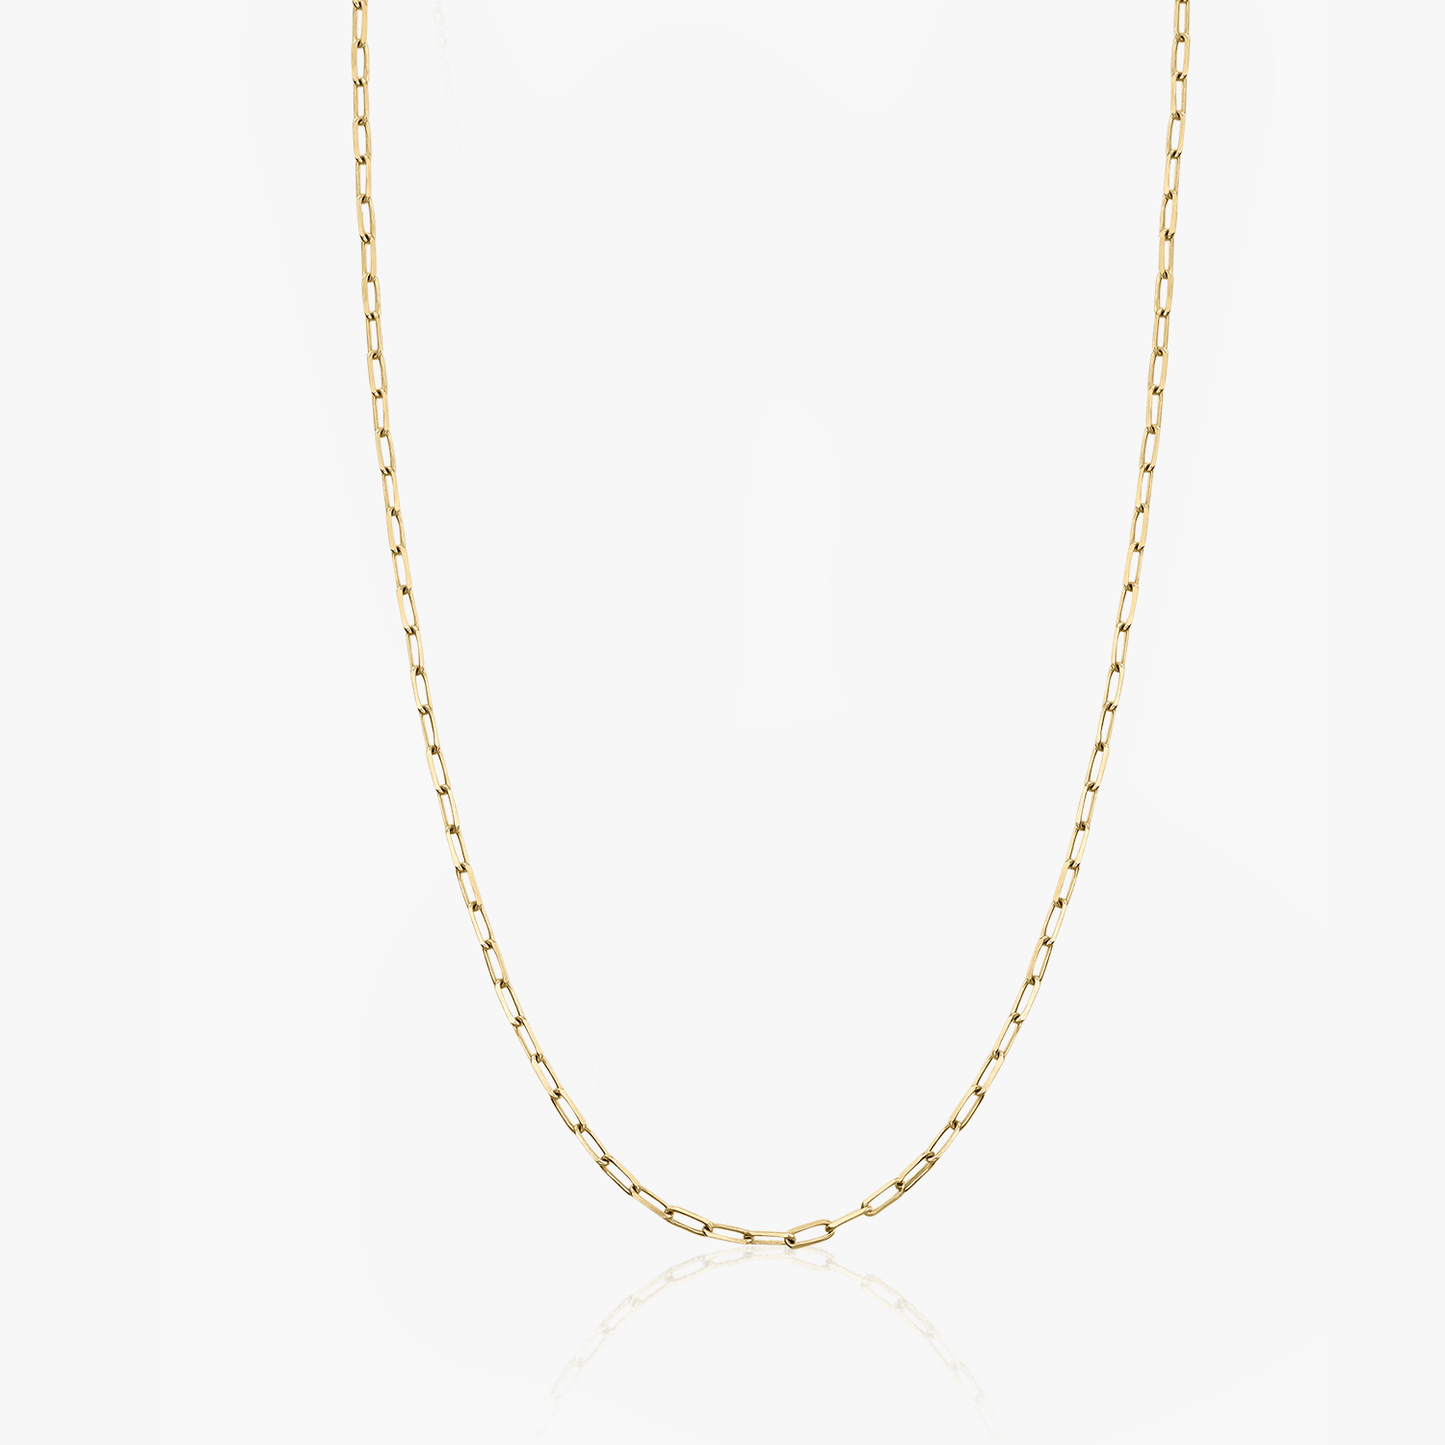 Golden Paperclip choker silver necklace